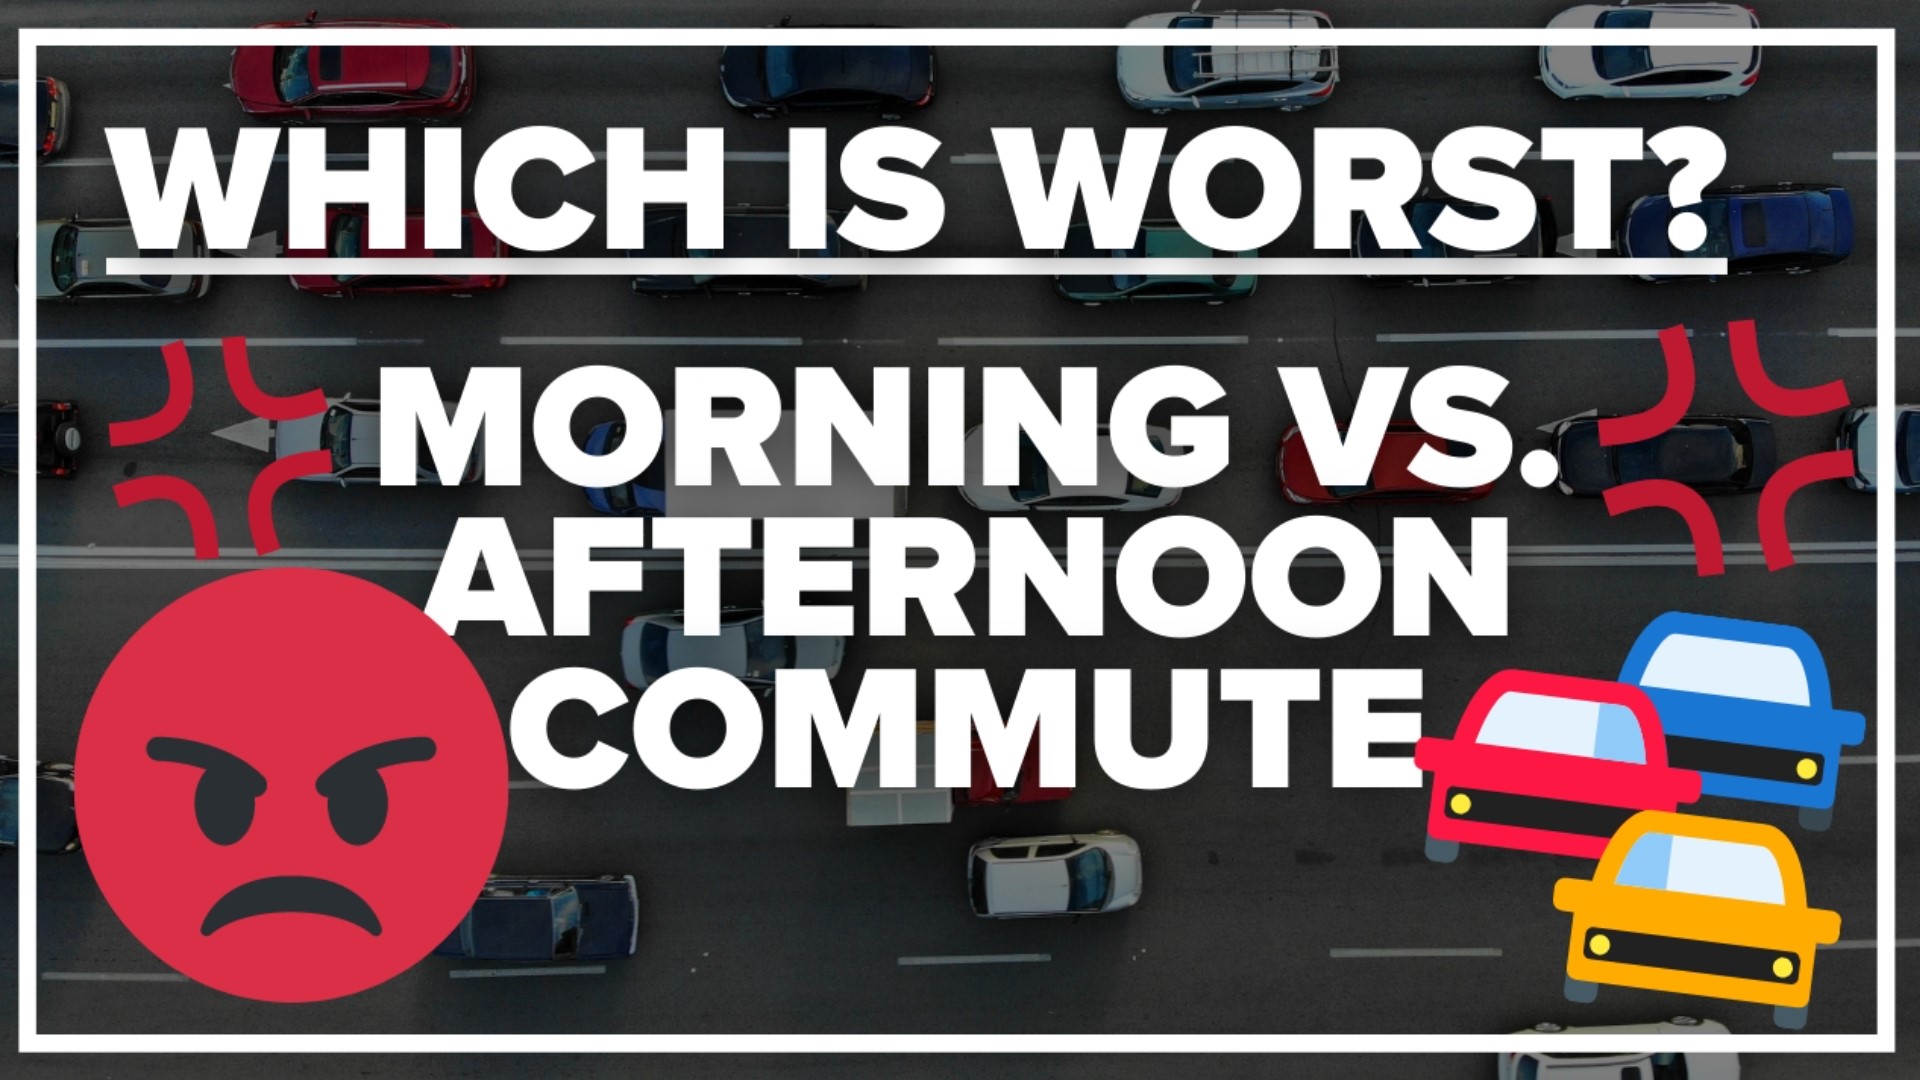 No one likes sitting in traffic. But will you spend more time in traffic in the morning or evening? We verify.